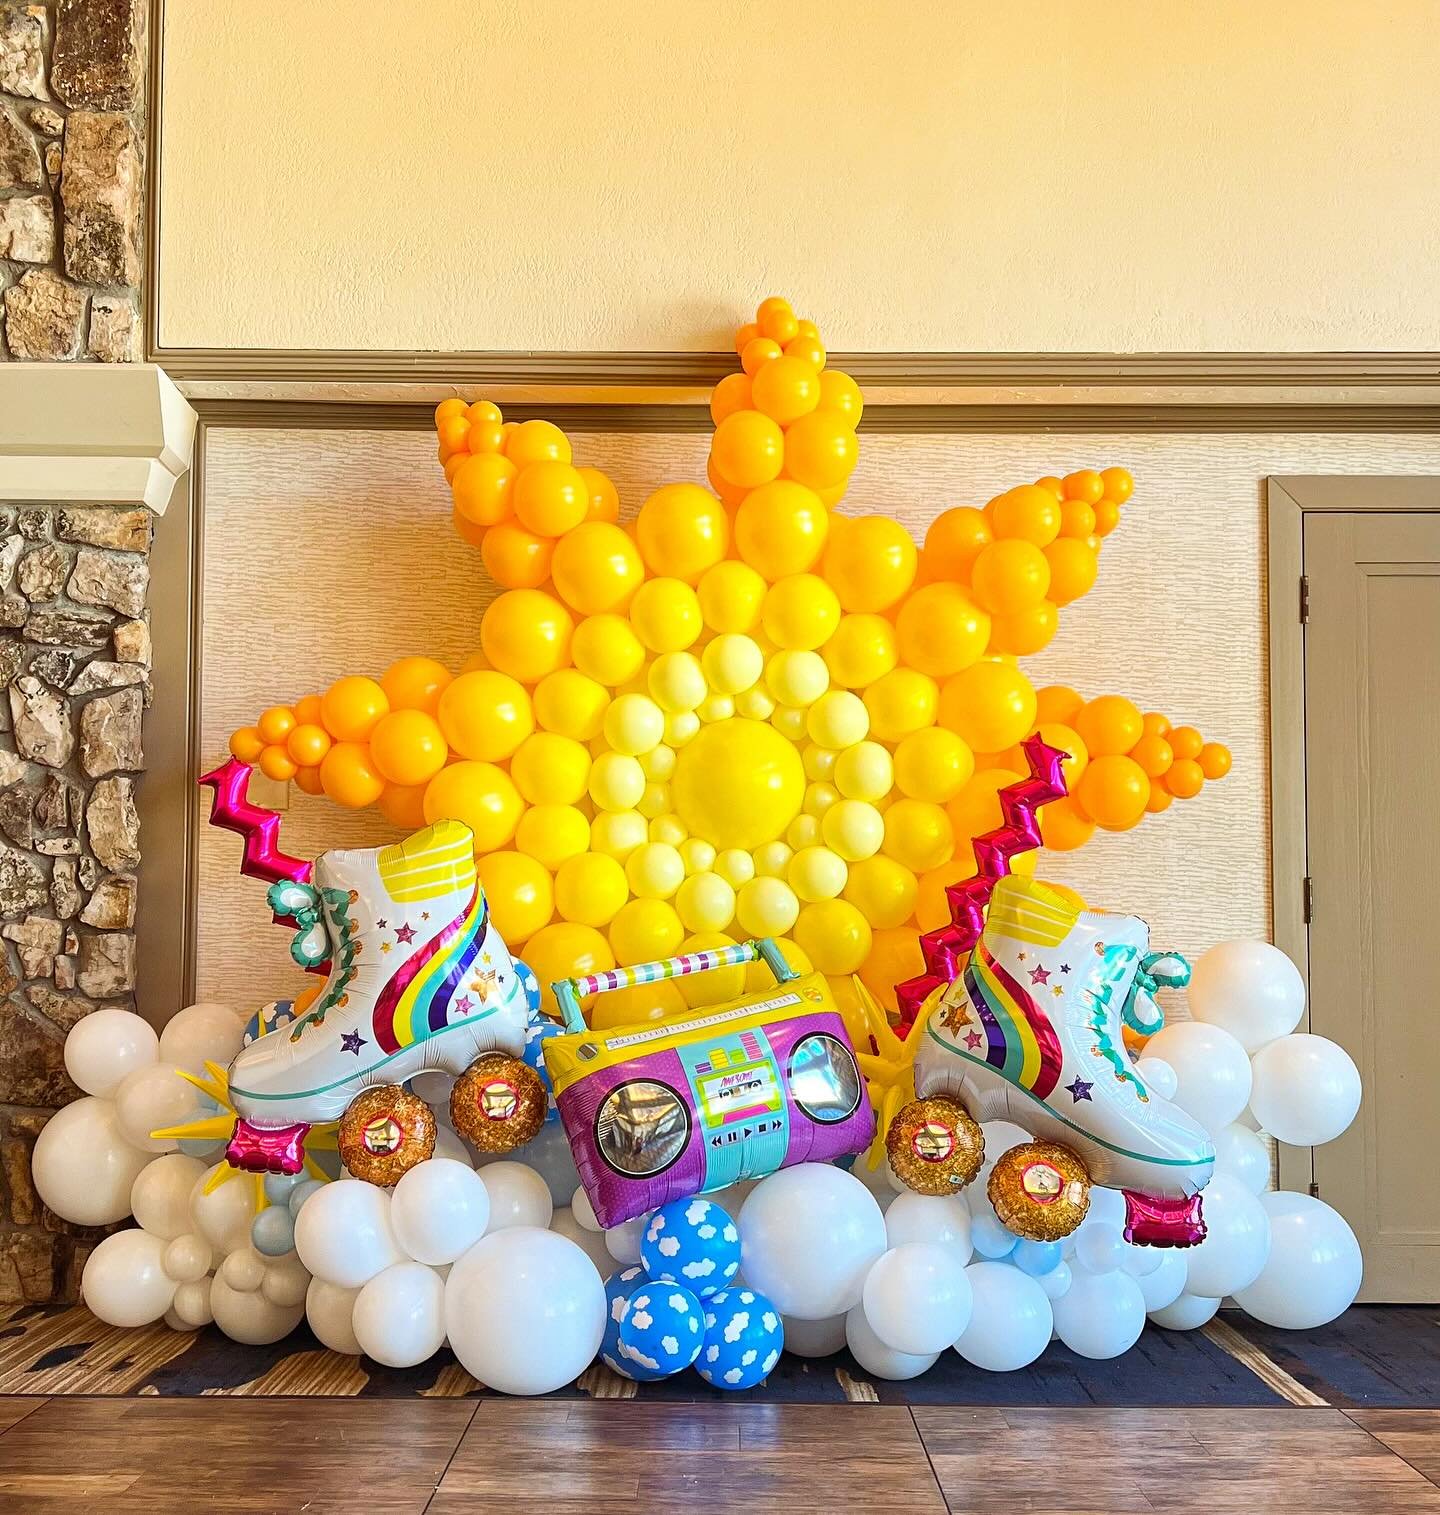 For the sunshine kids! Big shout out to @extrabetty for sharing her sun recipe. This design is for a very special organization and I hope this brightens your day a little! 
.
.

.
. #balloontower #balloon #birthdayballoons #birthday🎂 #balloons #orga